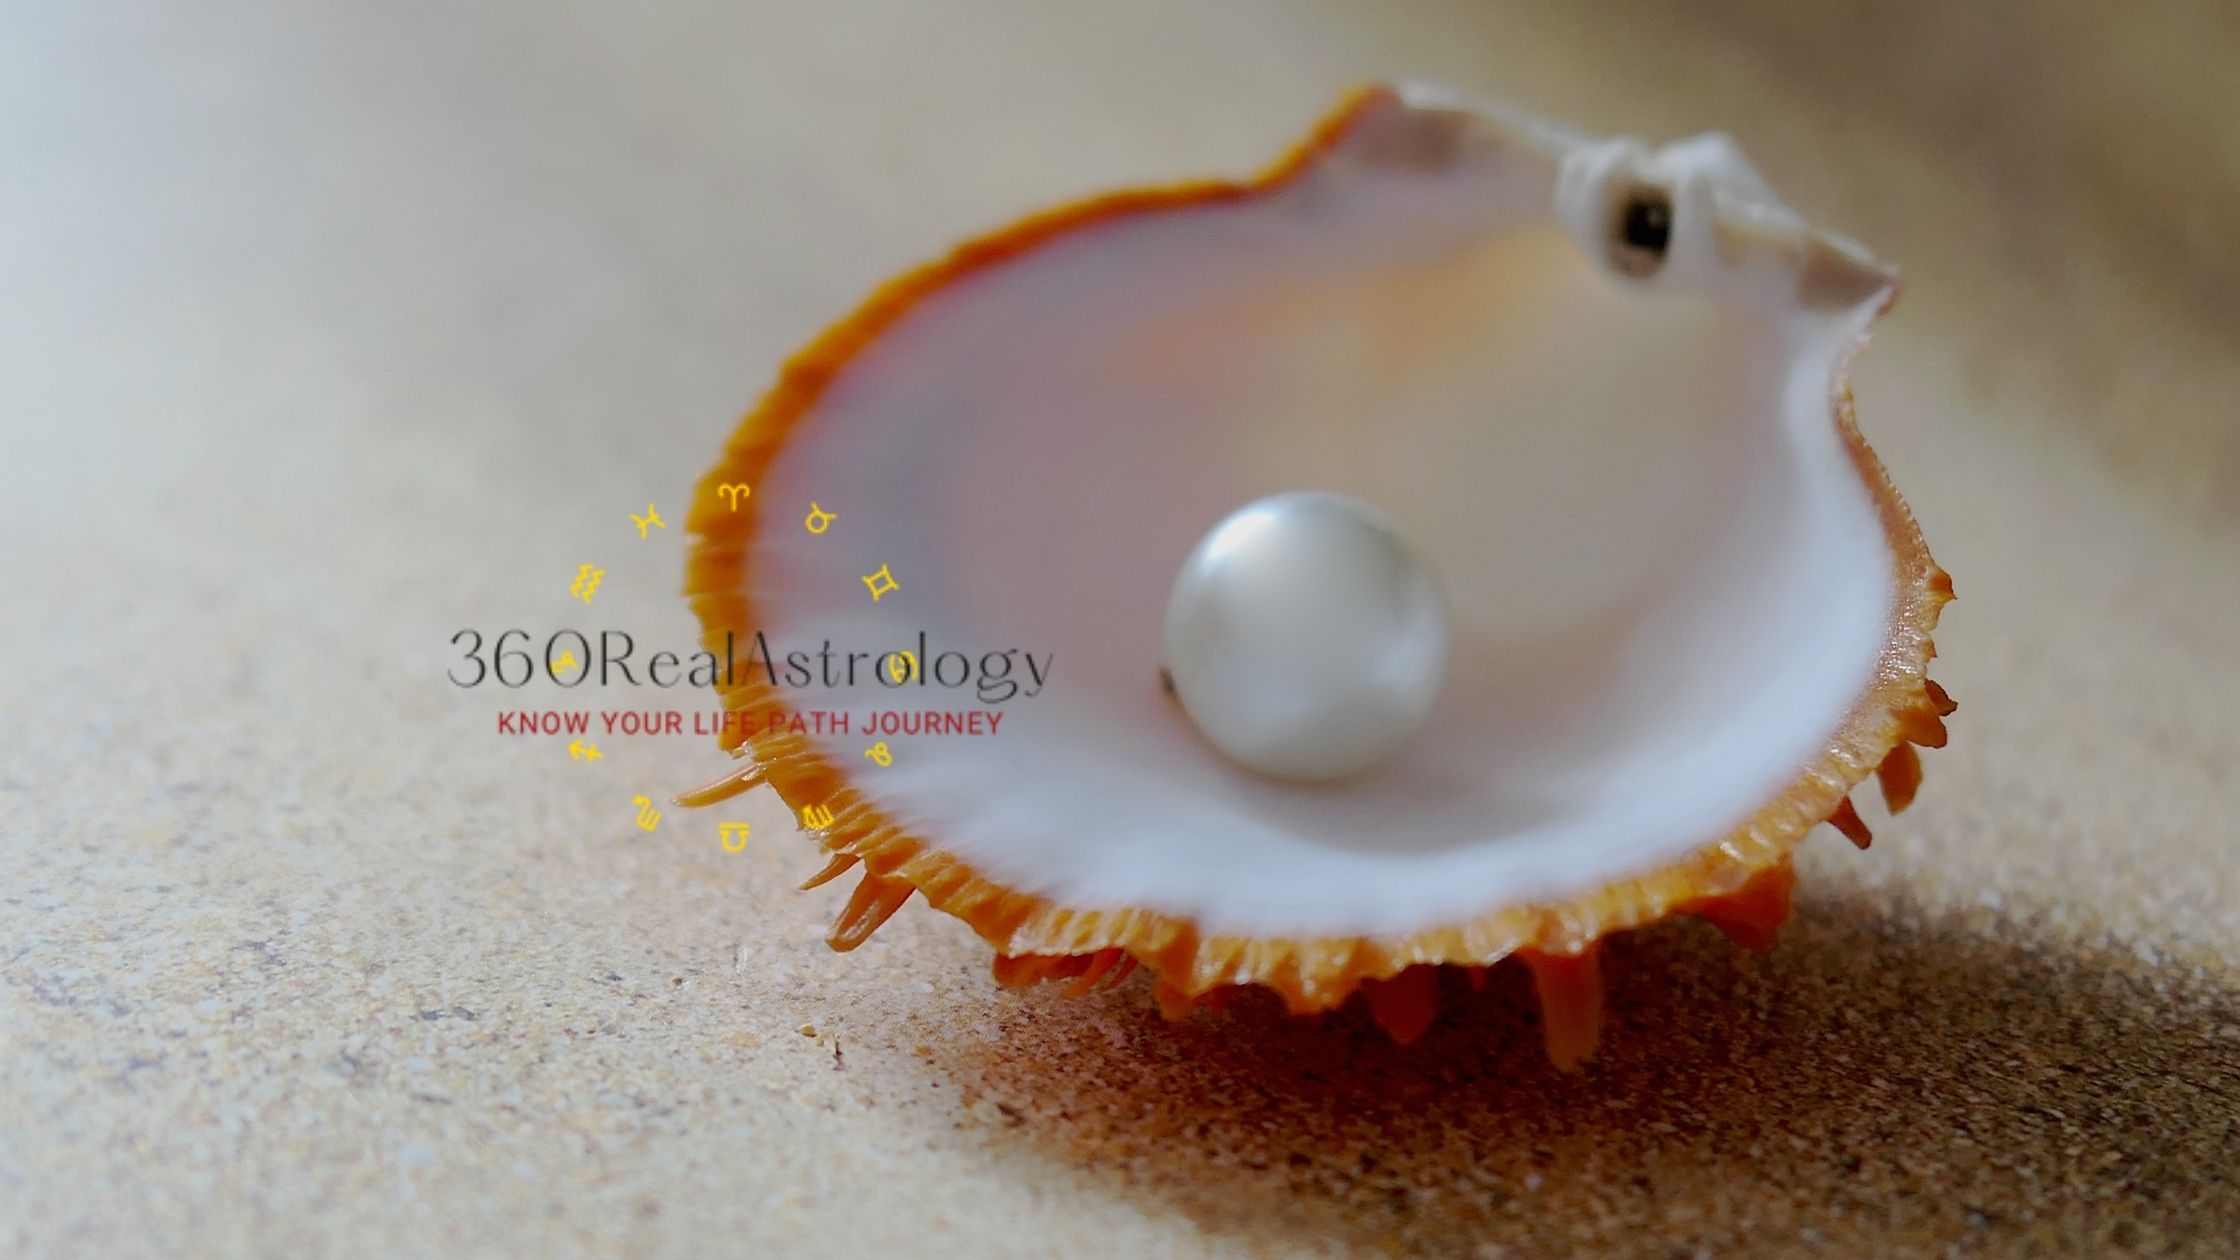 pearl astrological benefits